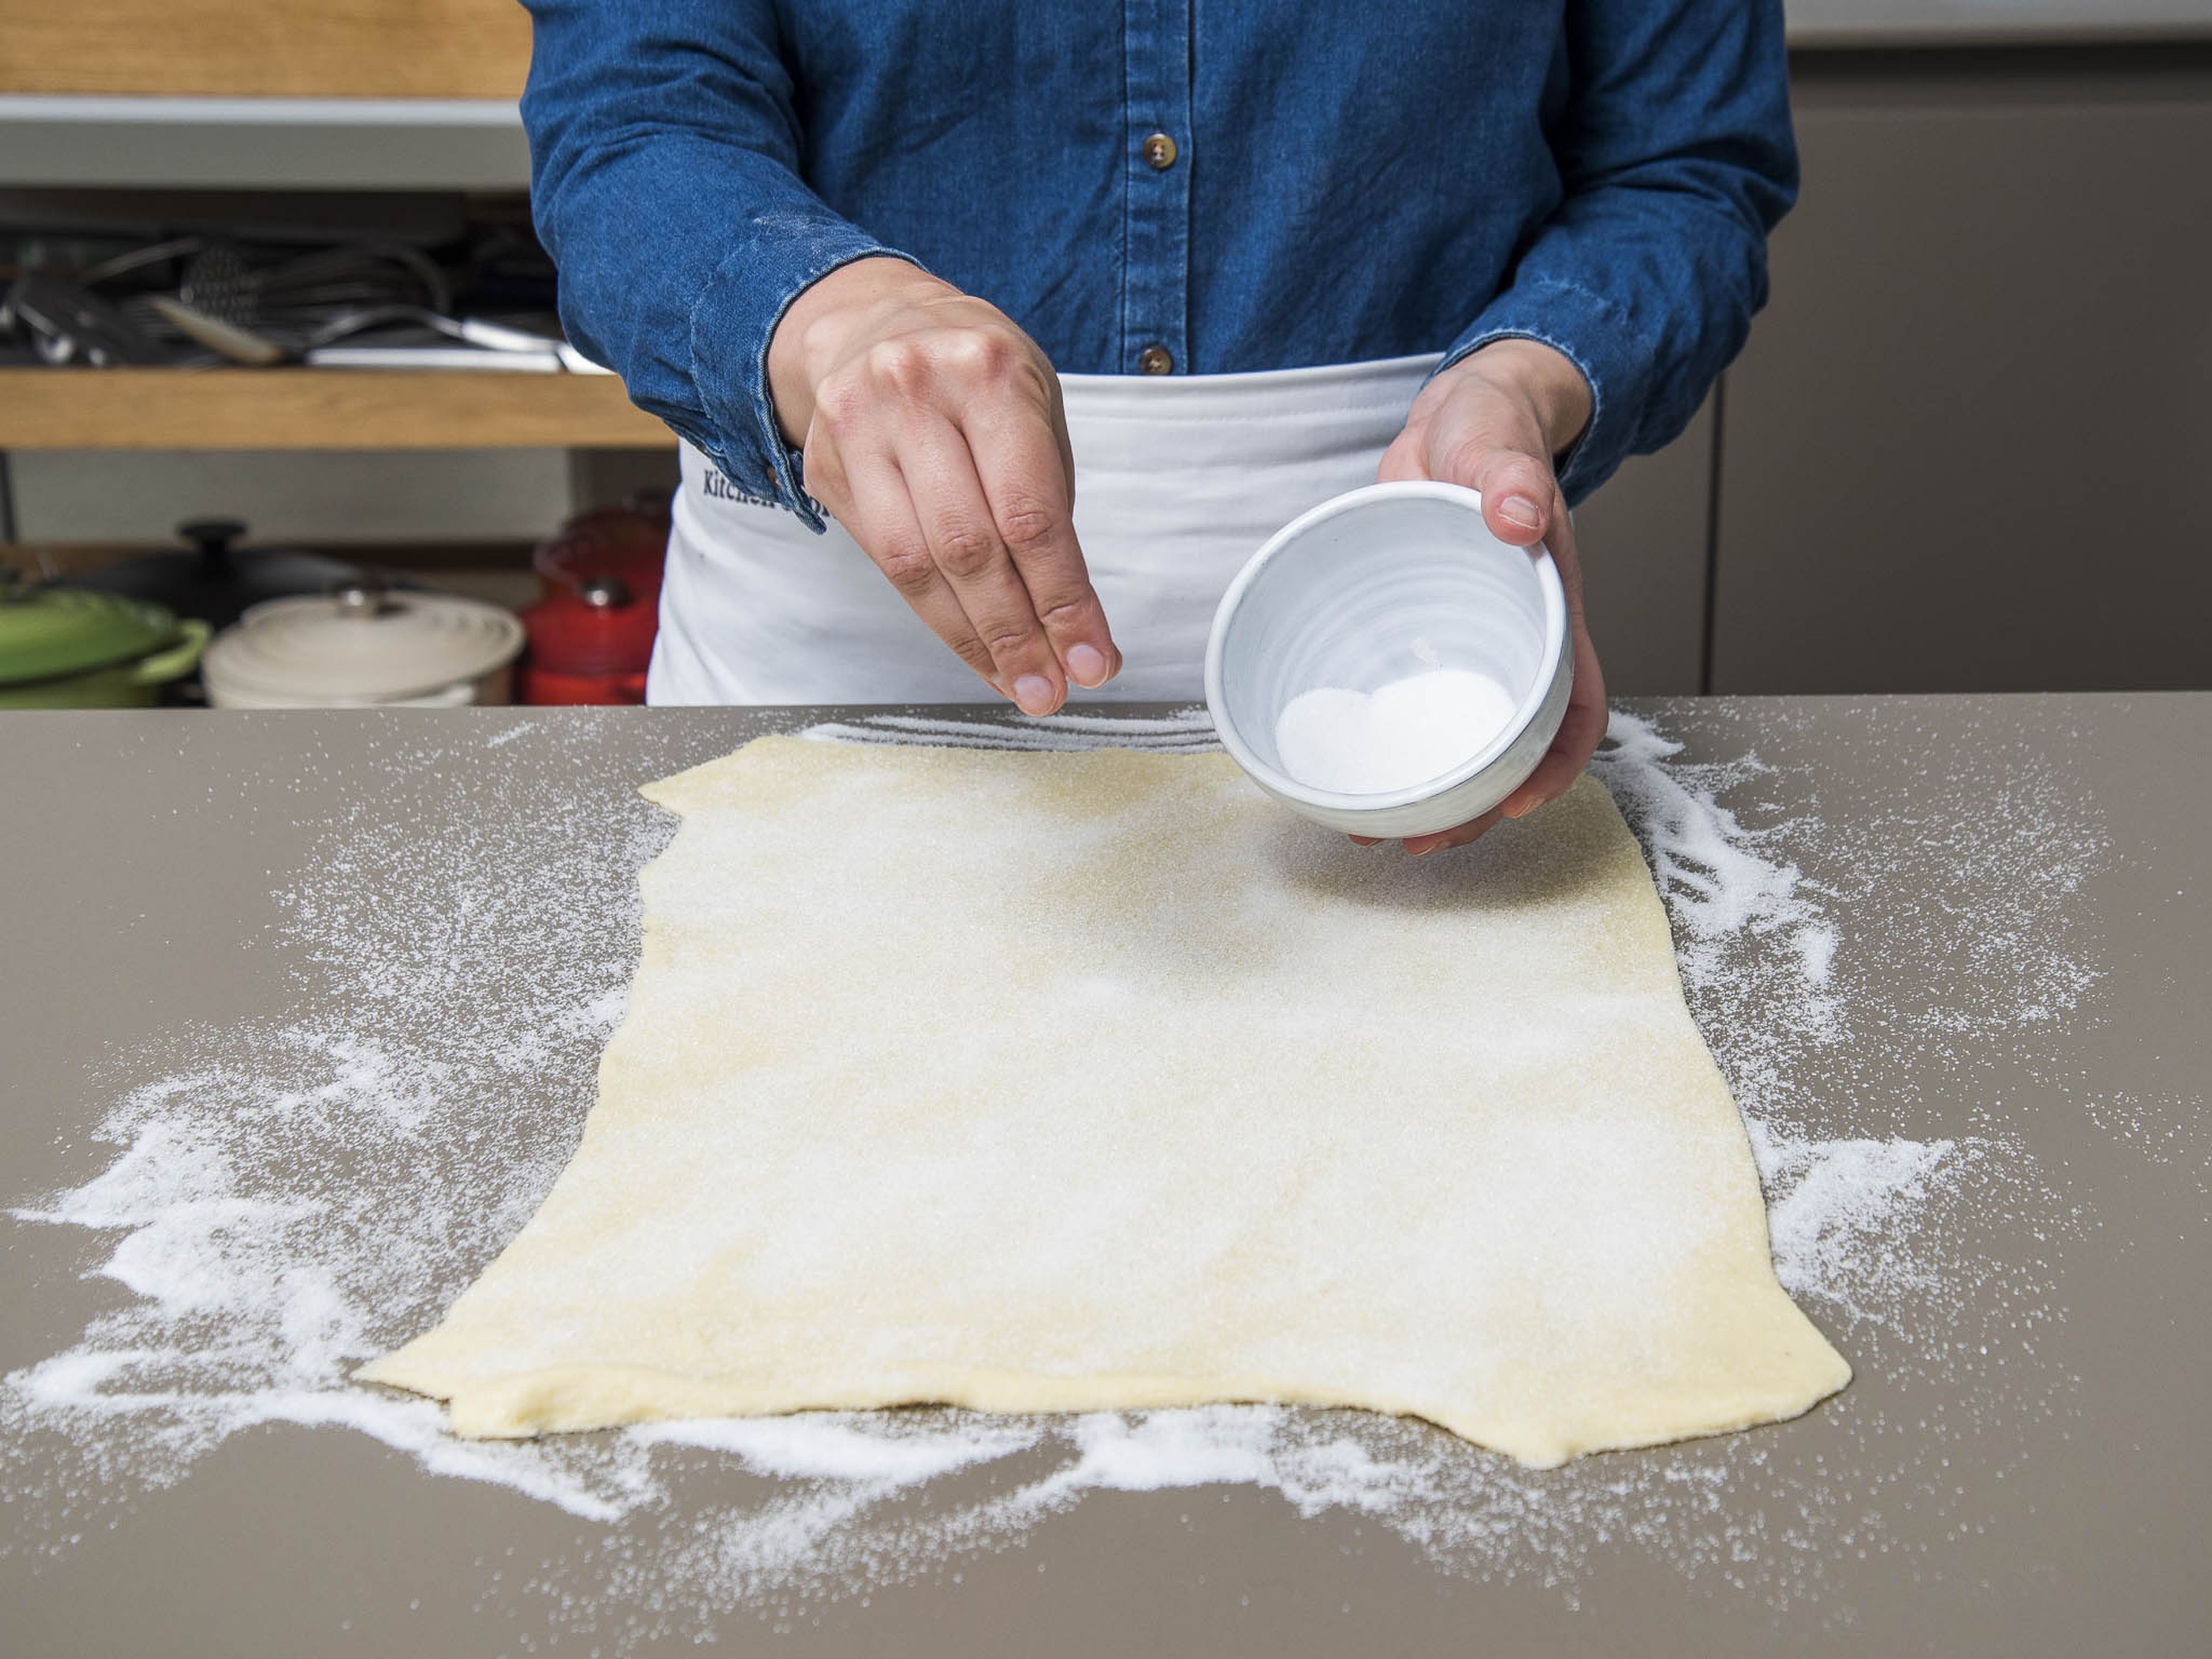 combine sugar and salt in a small bowl. Sprinkle some of the sugar mixture over a clean work surface, then place the puff pastry on top. Roll chilled pastry into a rectangle approx. 0.5-cm/0.25-inch.-thick, pressing the sugar into the dough. Sprinkle remaining sugar over the pastry, then lightly roll the pin over the sugar to press into the dough.